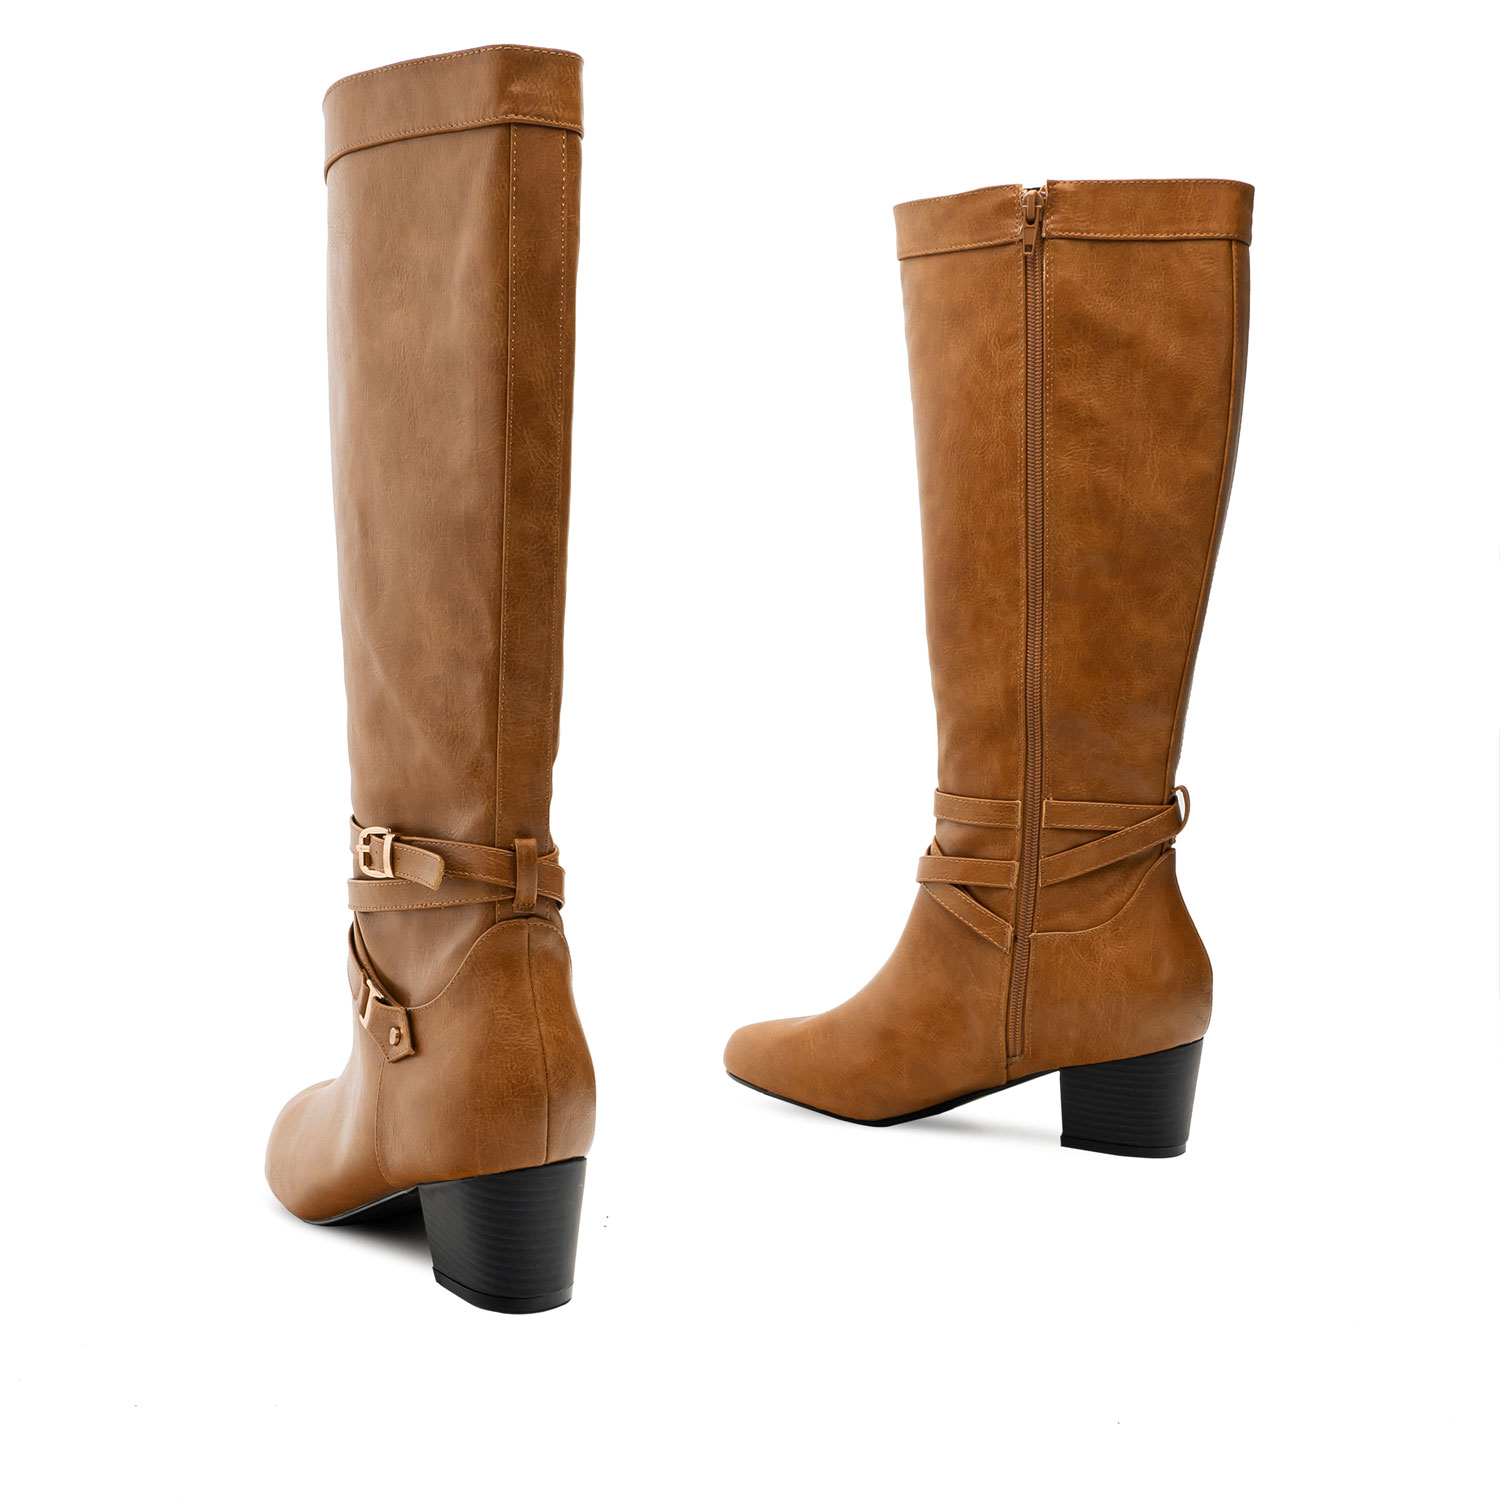 2-Buckled Boots in Camel Faux leather 